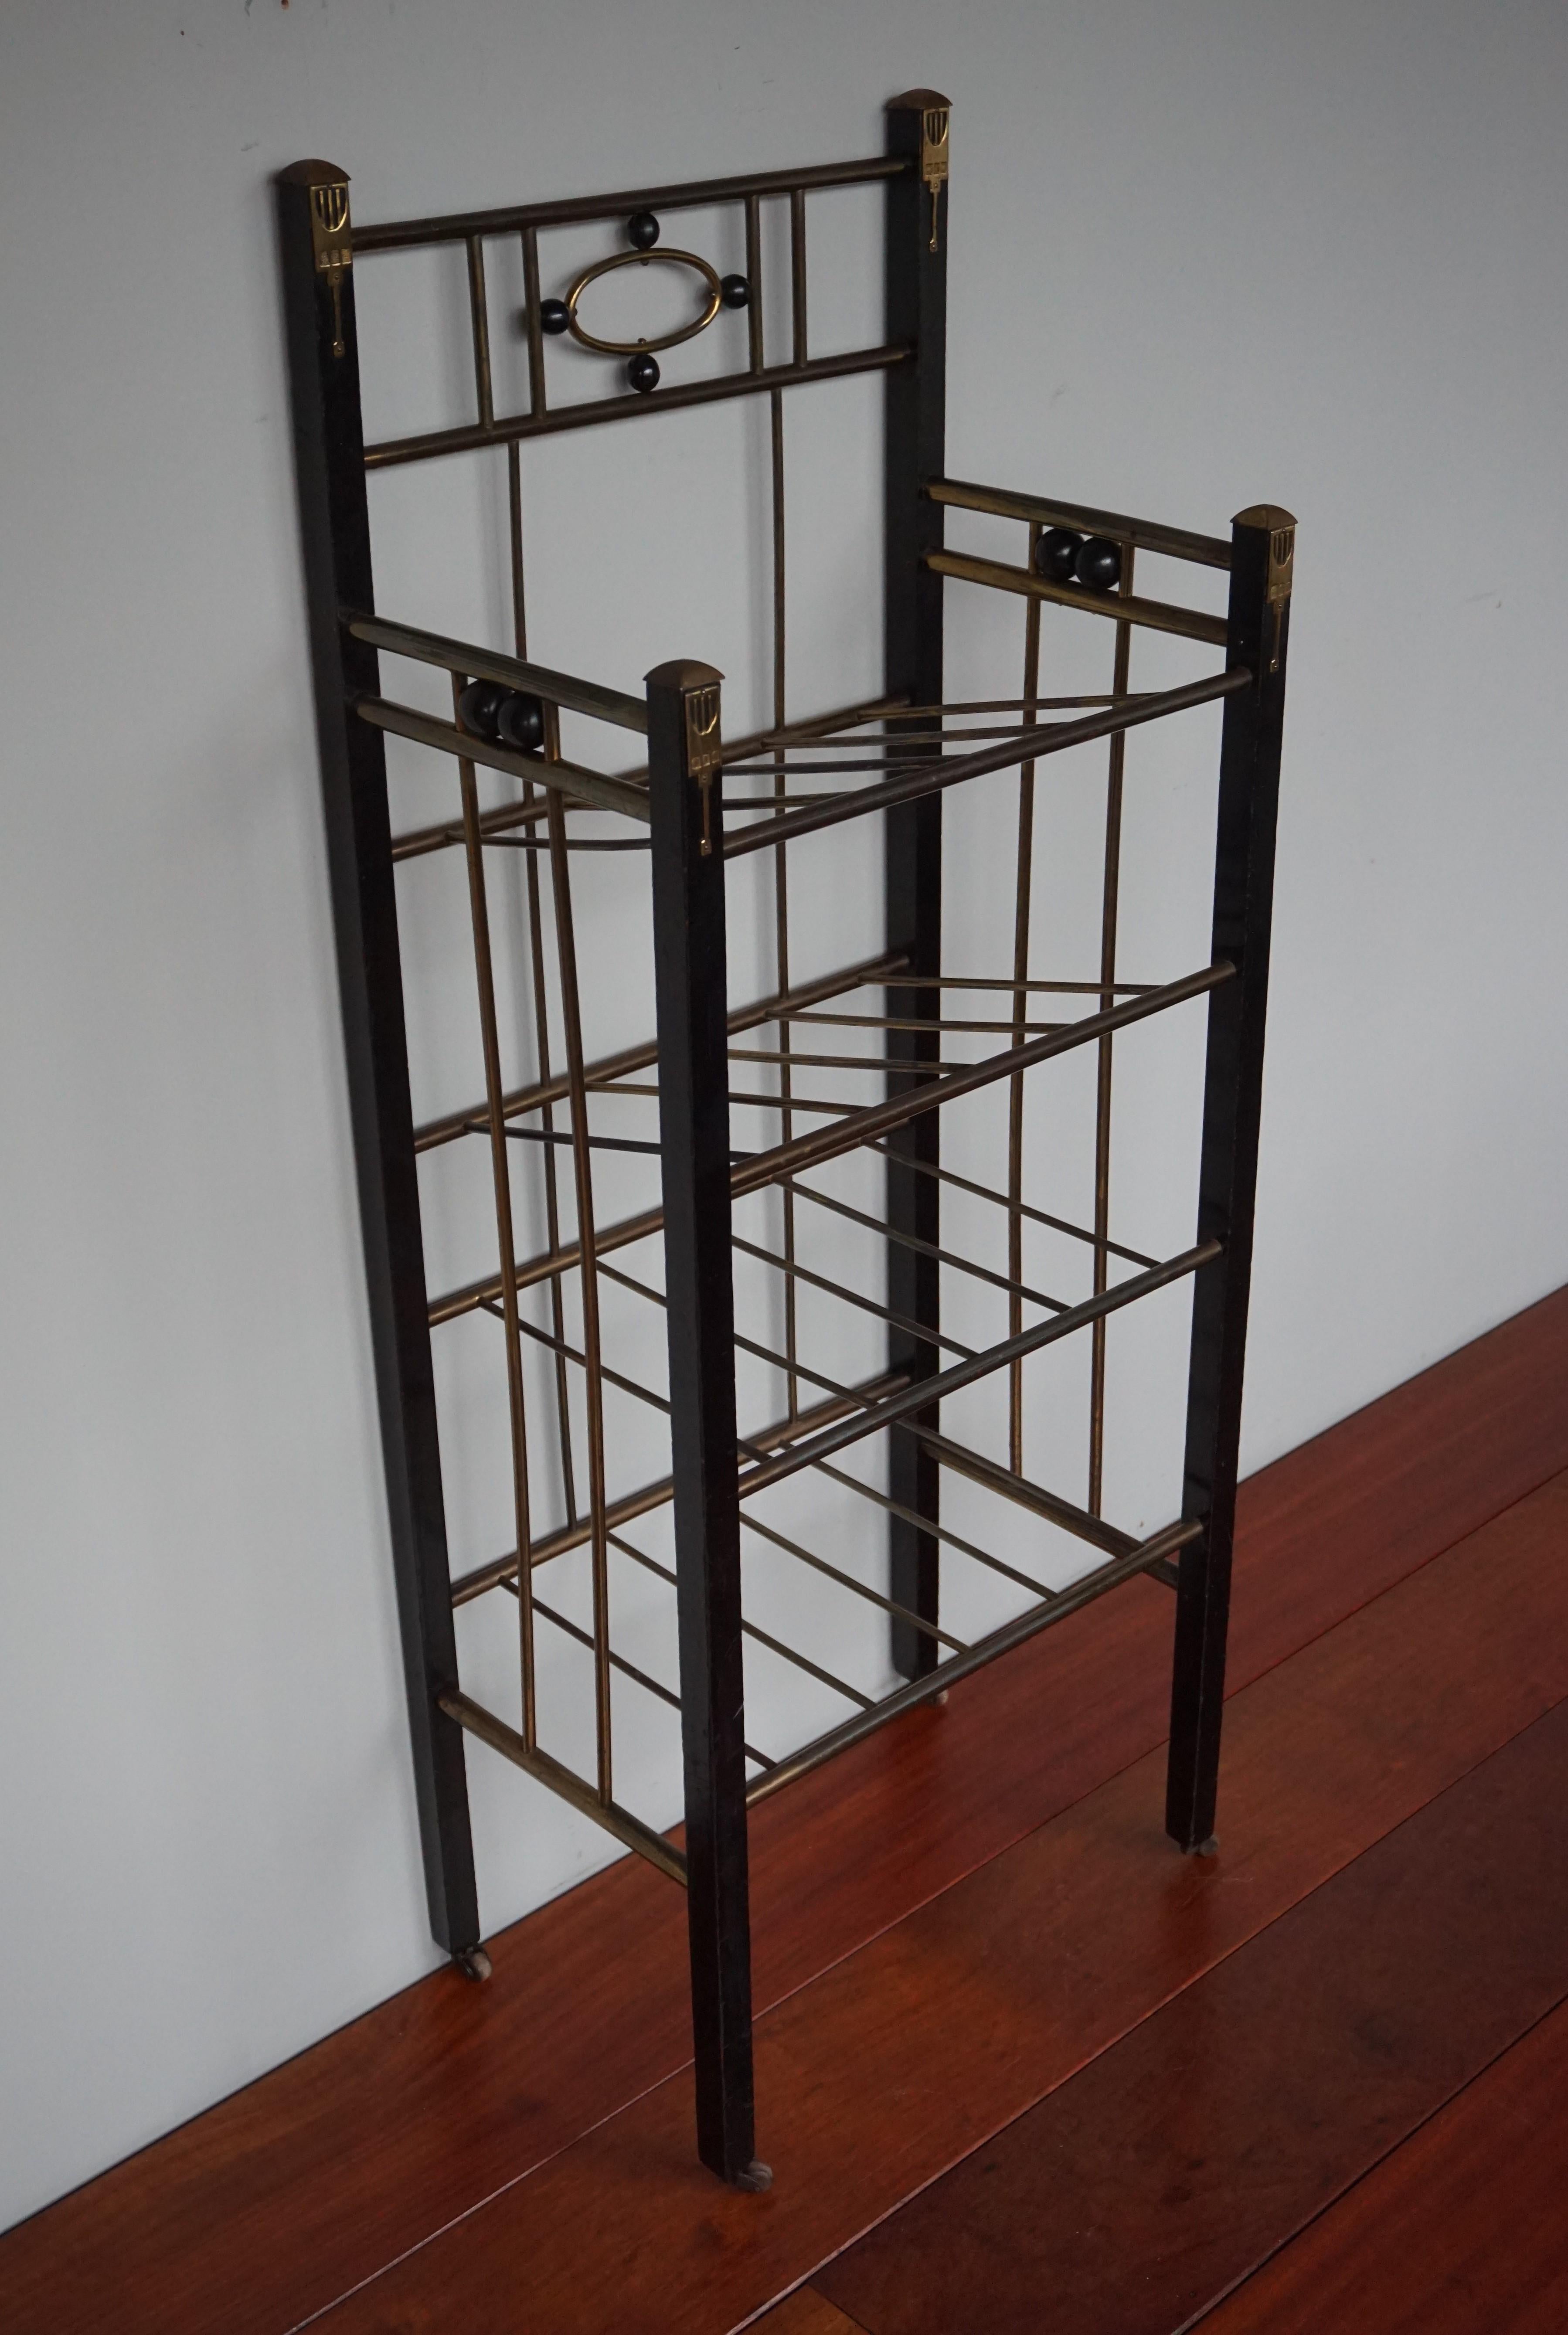 Stunning and practical ebonized stand with style elements in the manner of Josef Hoffmann.

This very stylish and all handcrafted modernist rack would have been made for the very well-to-do, circa turn of the century. The wooden legs of this rare